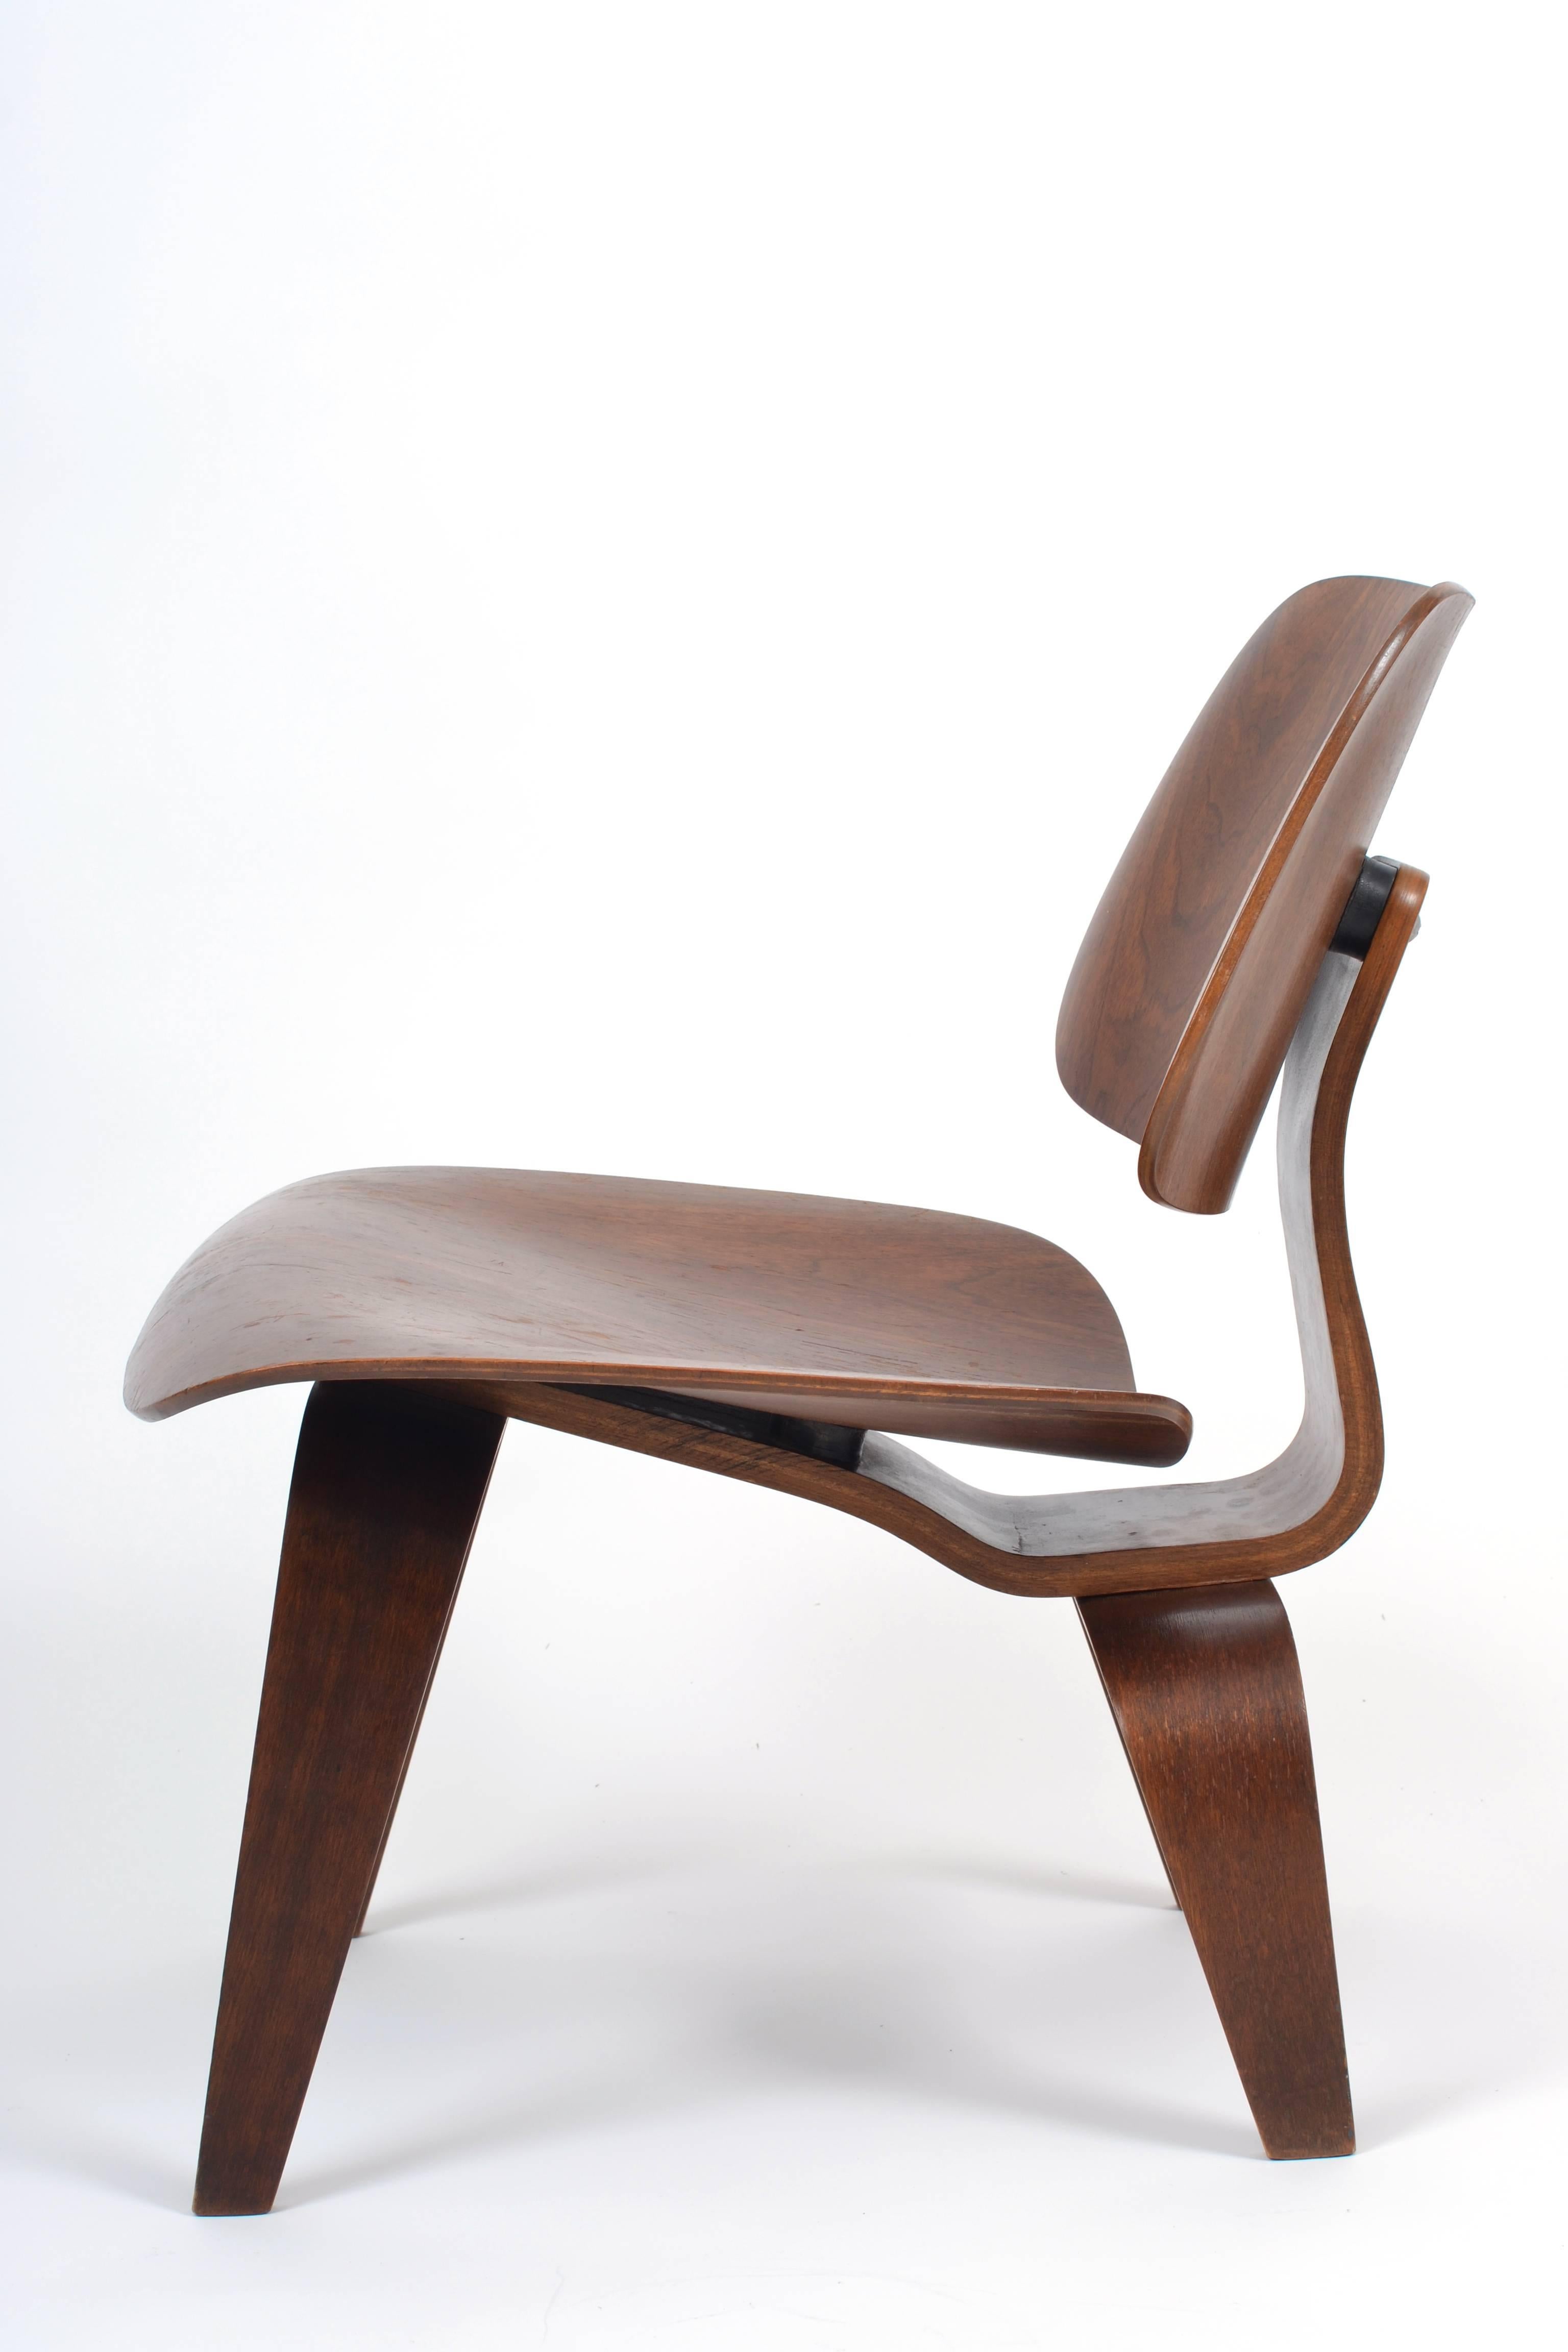 Mid-Century Modern Herman Miller Walnut Evans LCW Lounge Chair by Charles and Ray Eames, 1940's